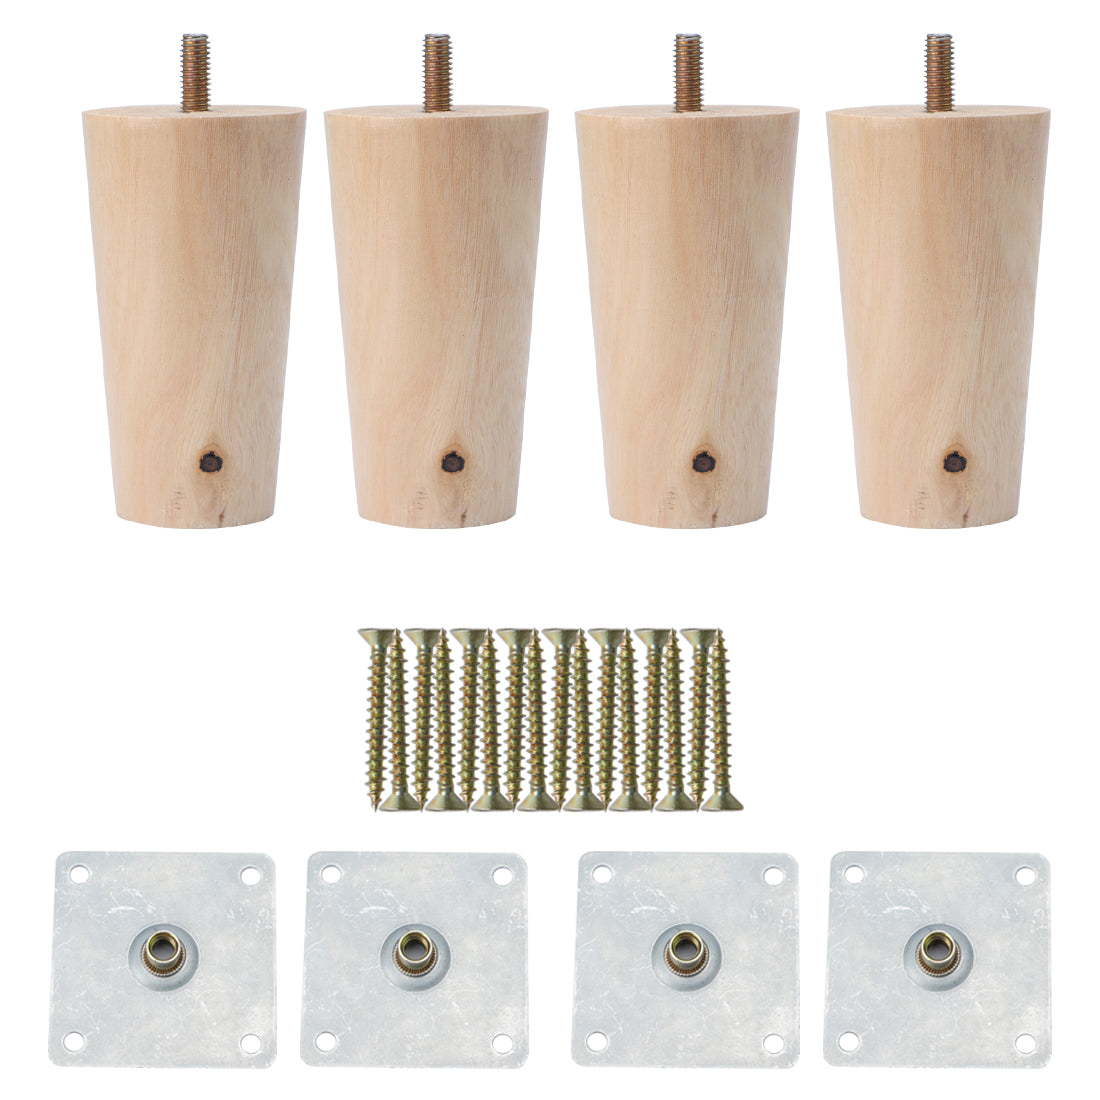 uxcell Uxcell 4" Round Solid Wood Furniture Leg Table Desk Feet Adjuster Replacement Set of 4